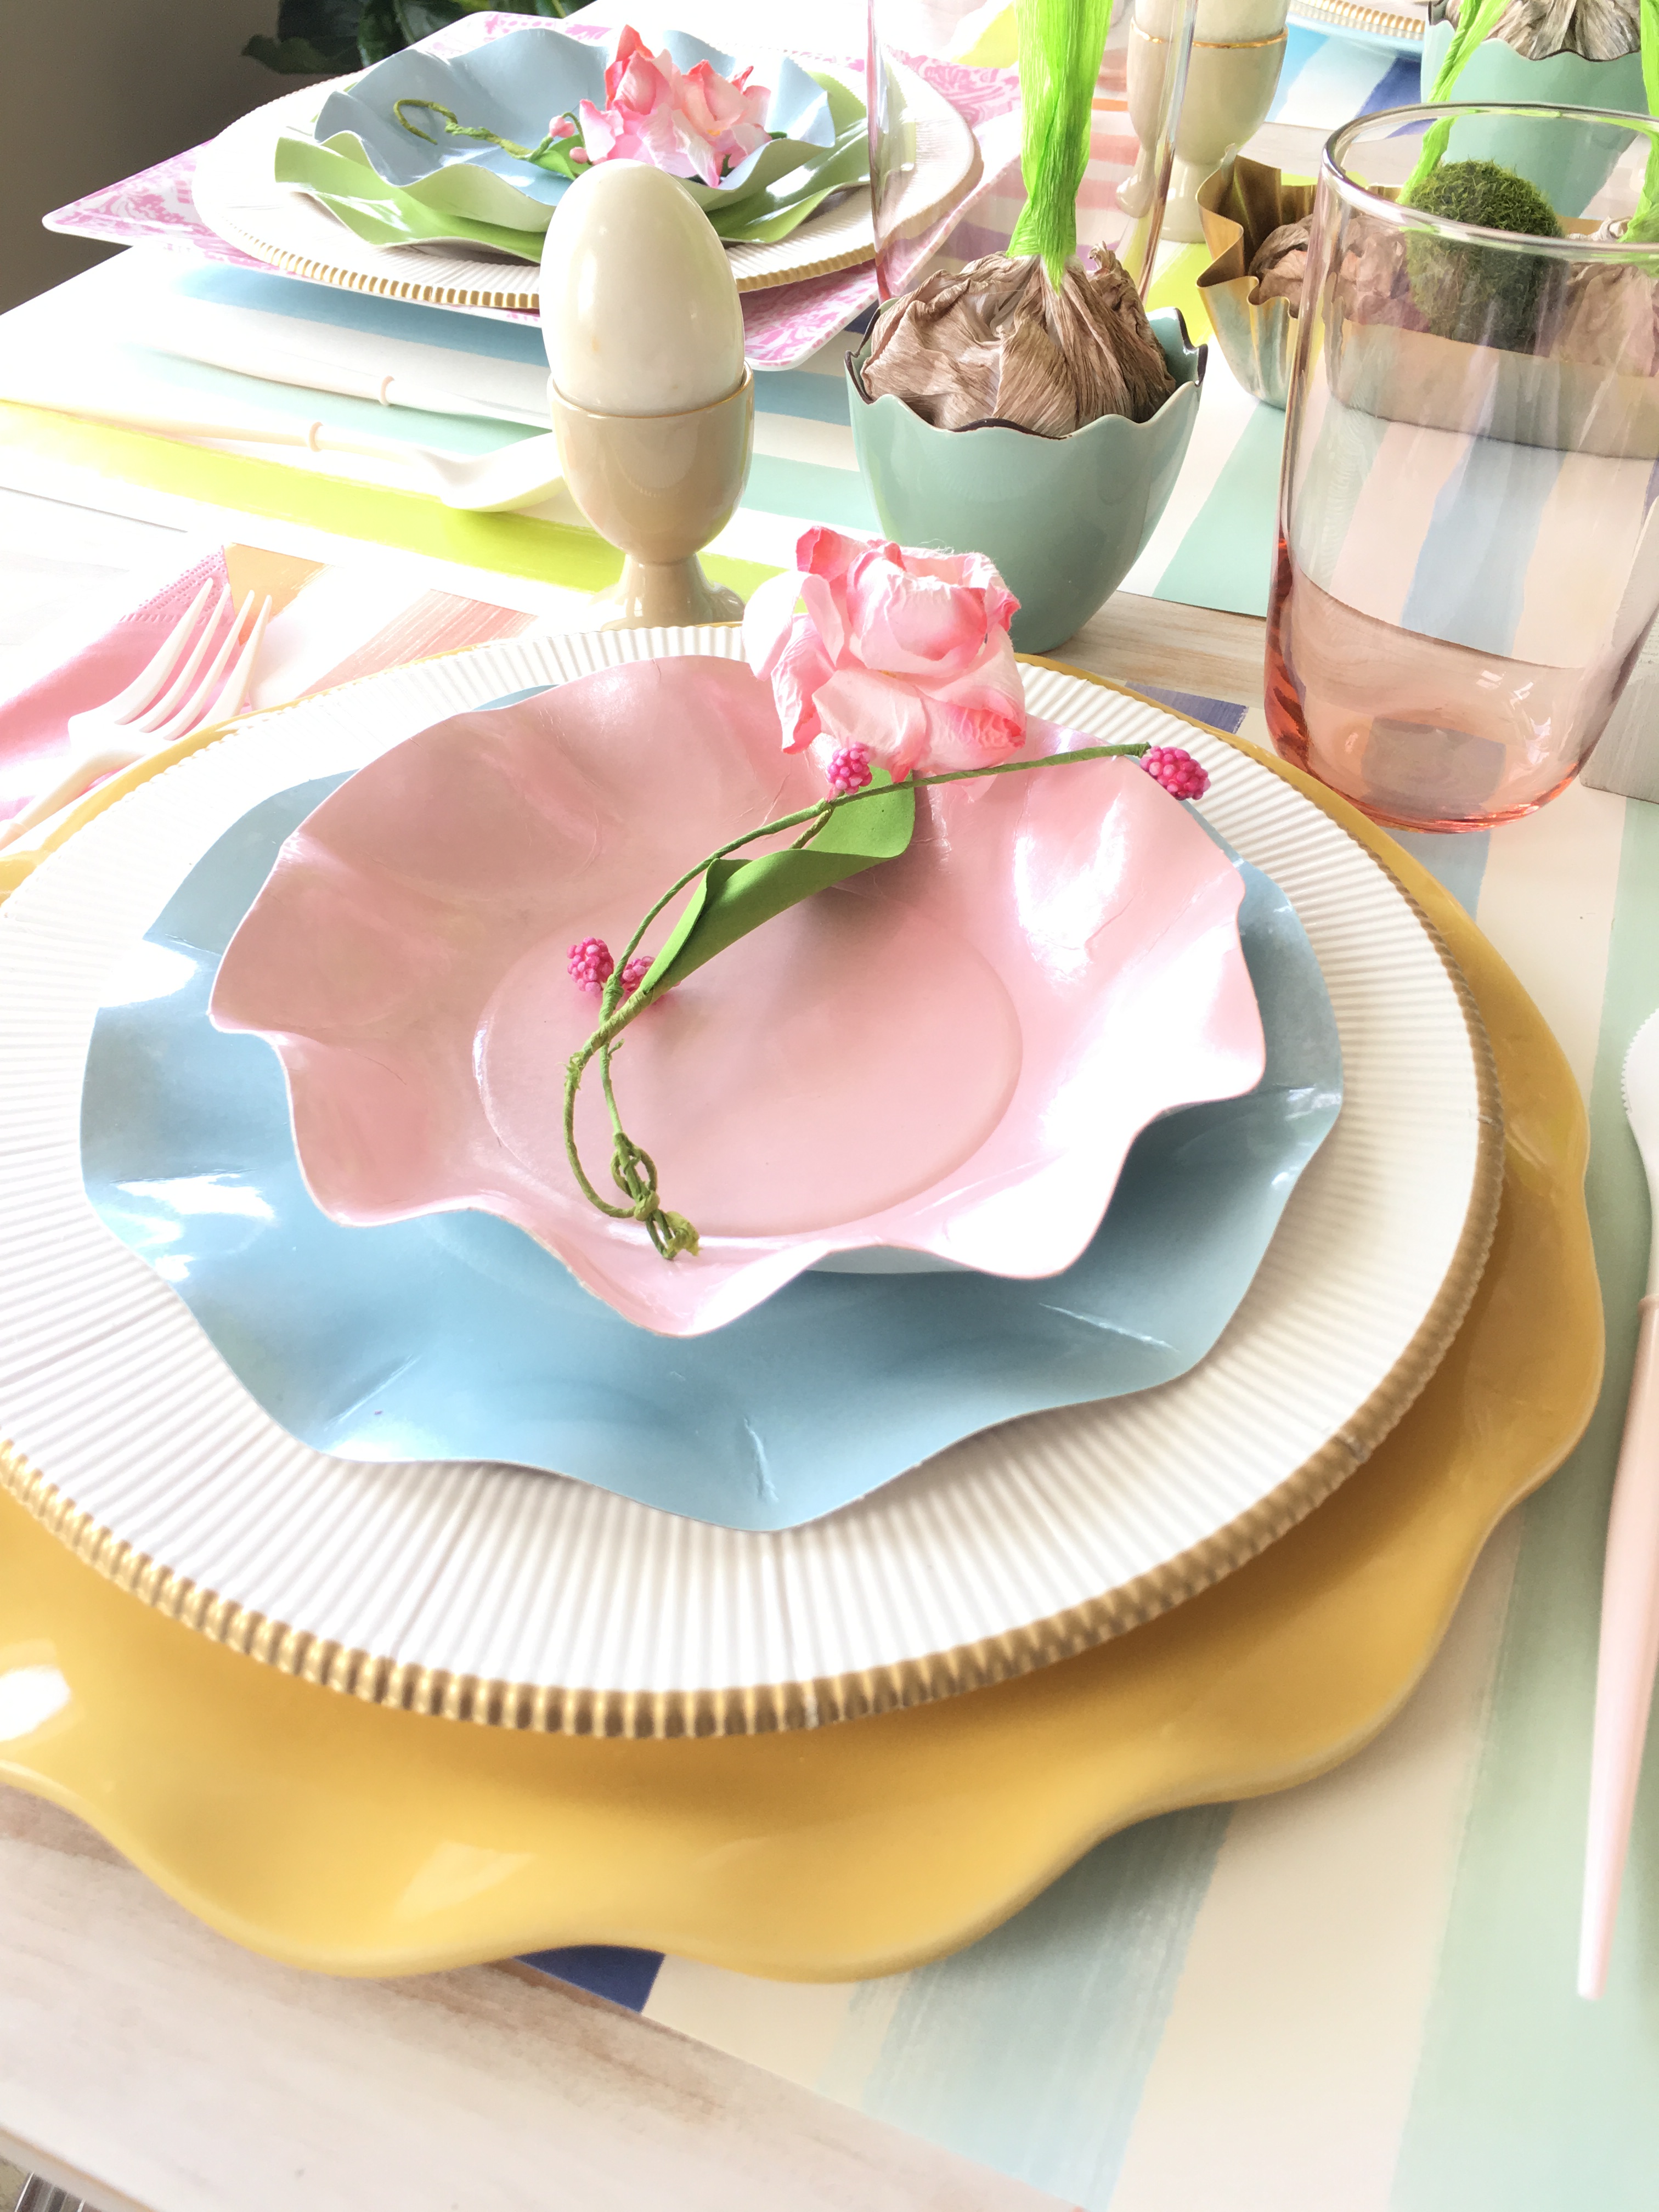 fairy land table setting, Easter table settings, table scapes, spring table scapes, spring table settings, Hester and cook, sophistaplates, mushrooms, mushroom decor, Easter table, Easter, easy crafts, diy table decor. pastel table settings,